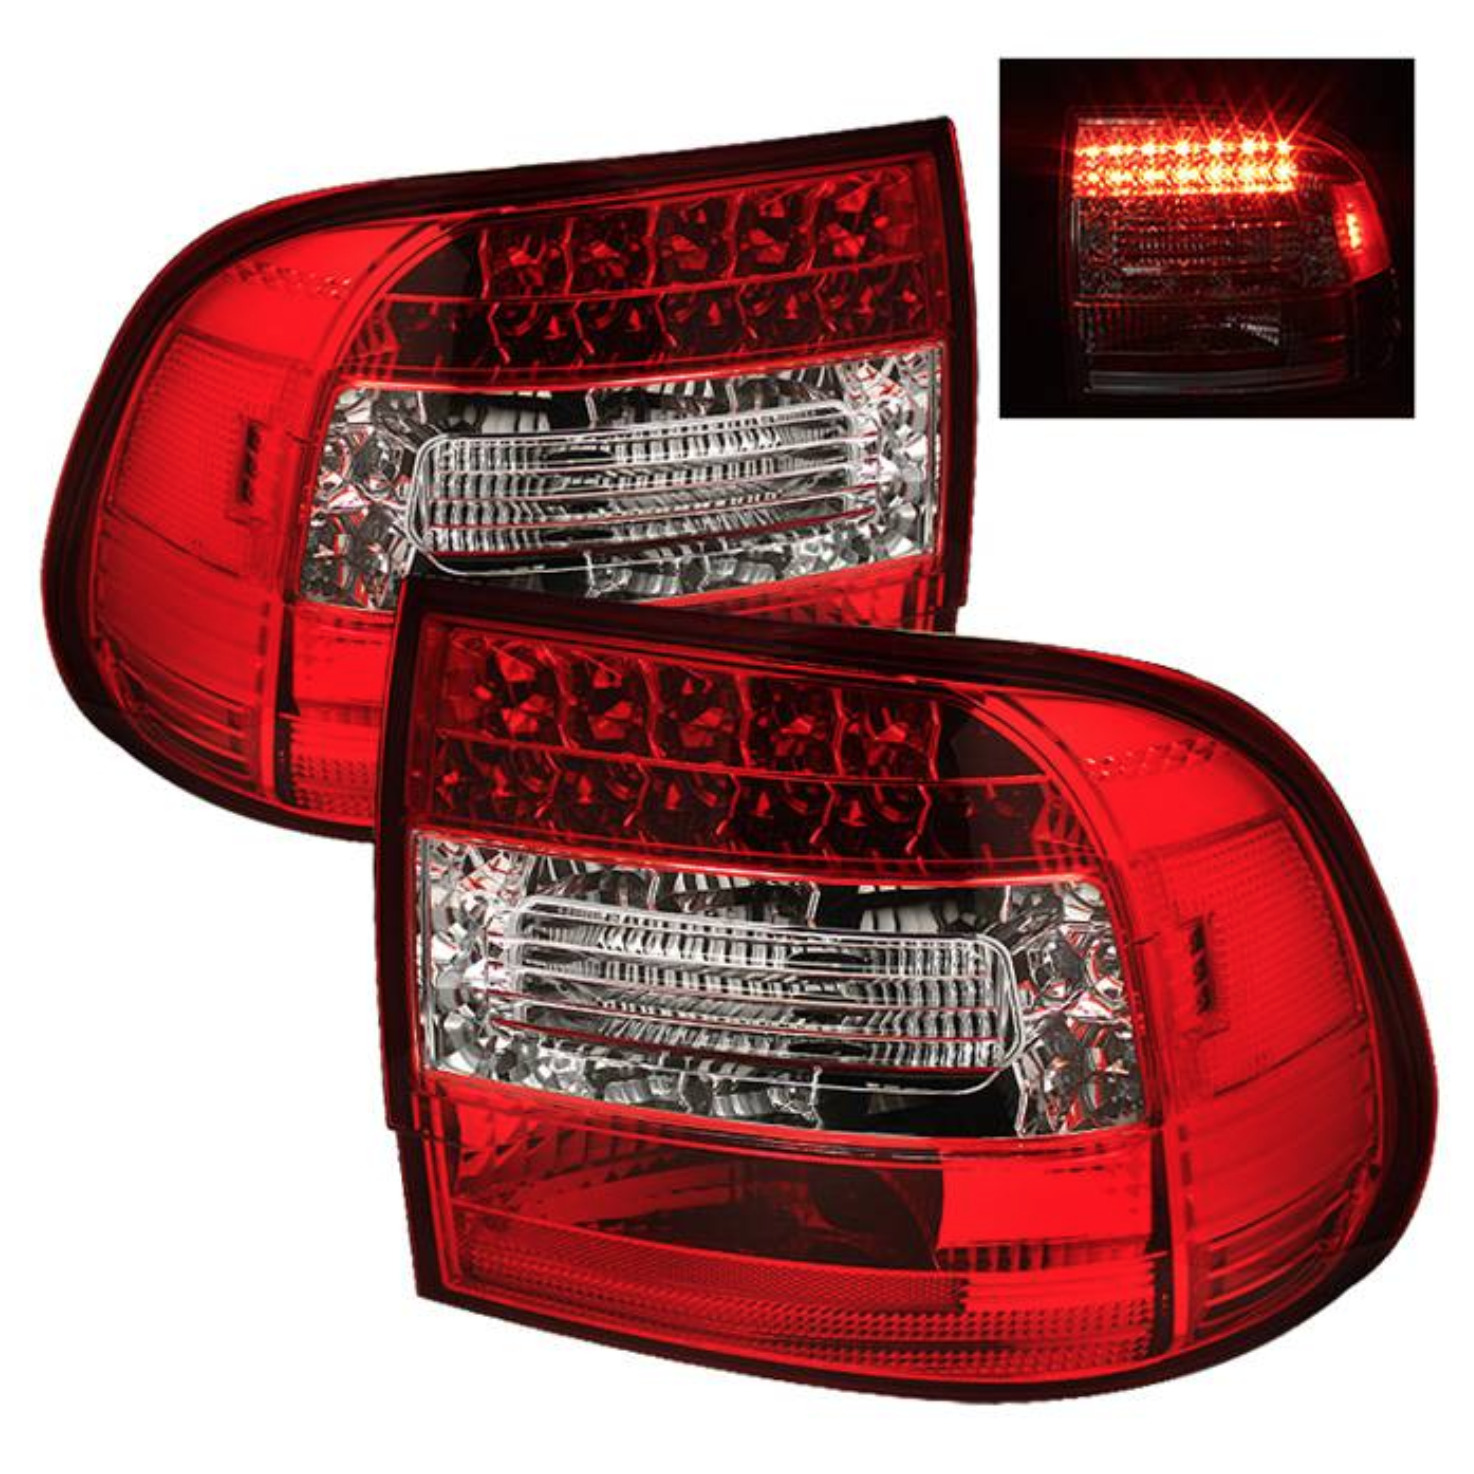 2003-2006 PORSCHE CAYENNE 955 SPYDER AUTO LED TAIL LIGHTS TAILLIGHTS RED CLEAR 